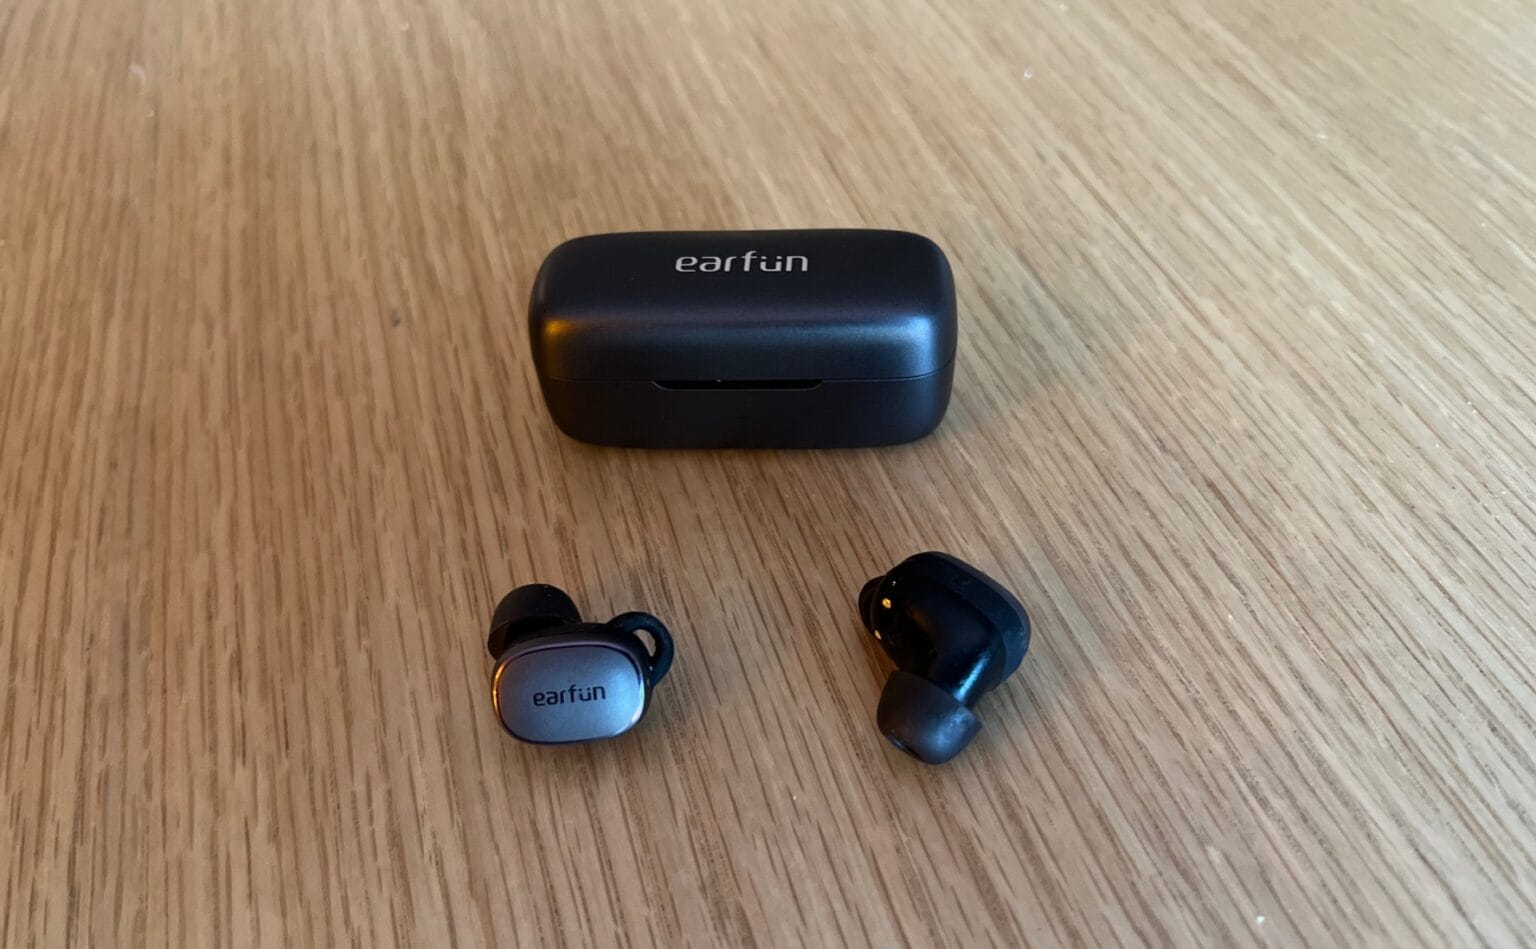 If you like compact, stemless earbuds with good sound, these are worth a try.